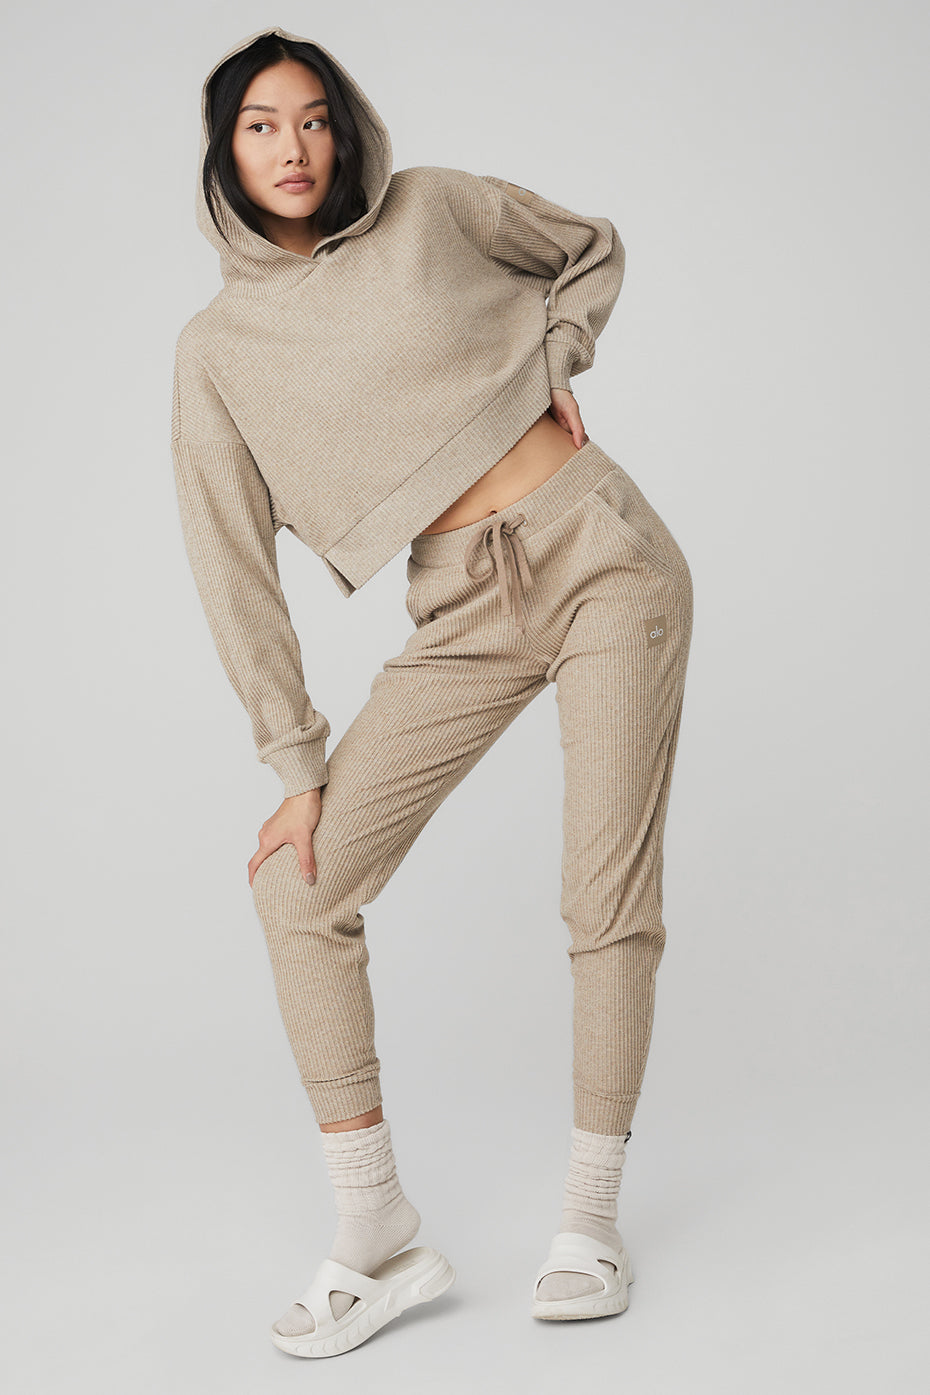 Muse Sweatpant - Gravel Heather  Sweatpants, Fashion joggers, Shopping  outfit